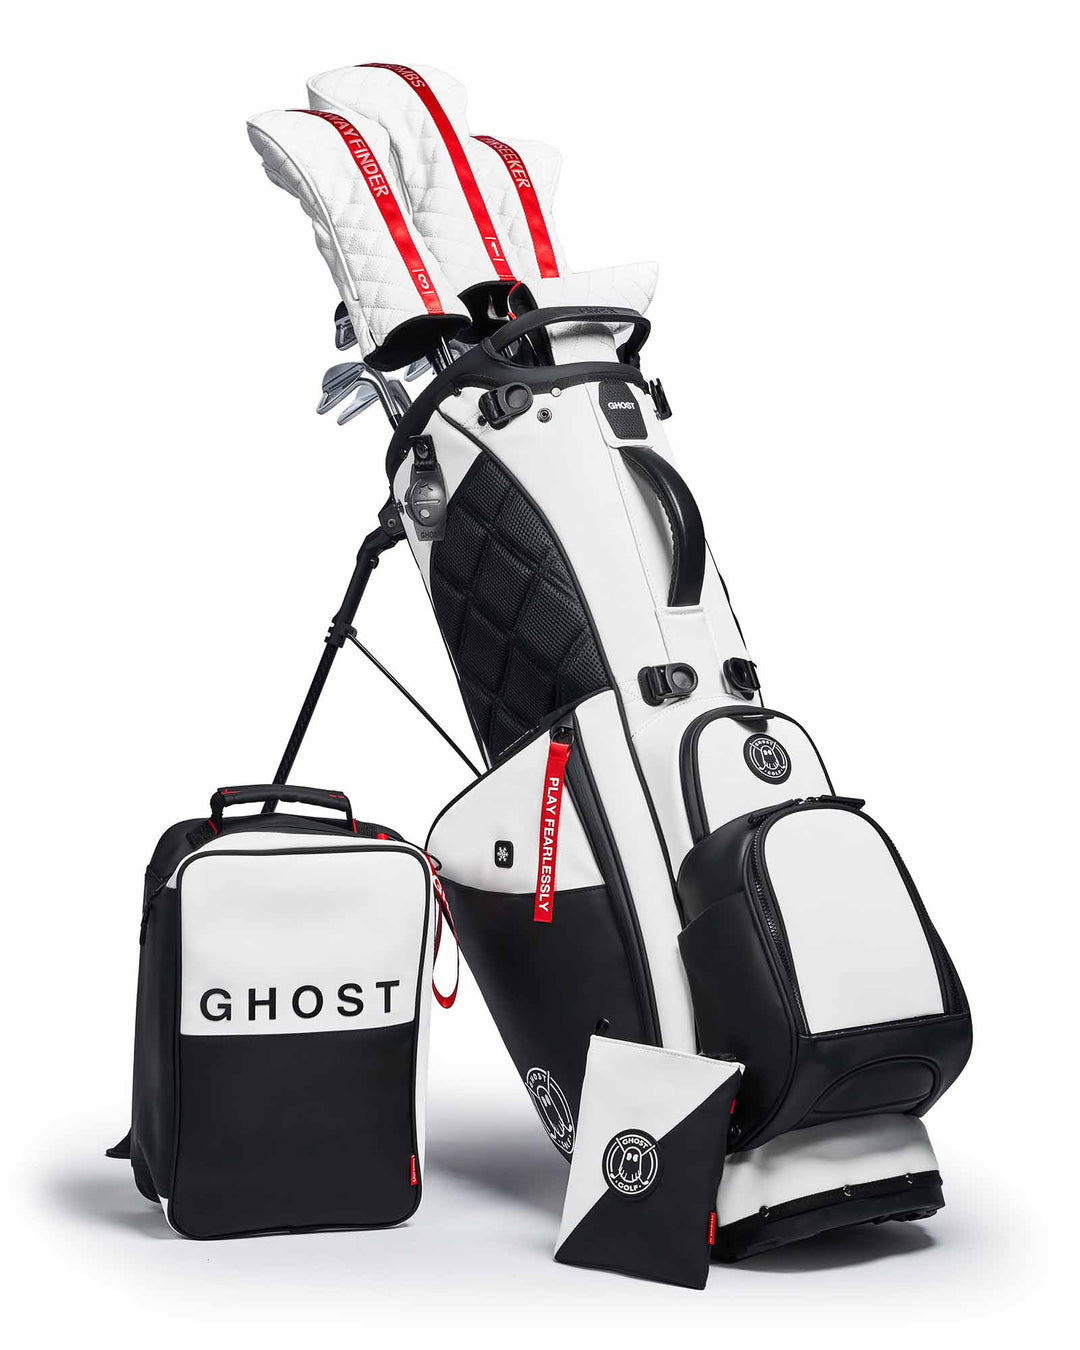 GhostGolf - The ultimate Ghost Golf bag additions that